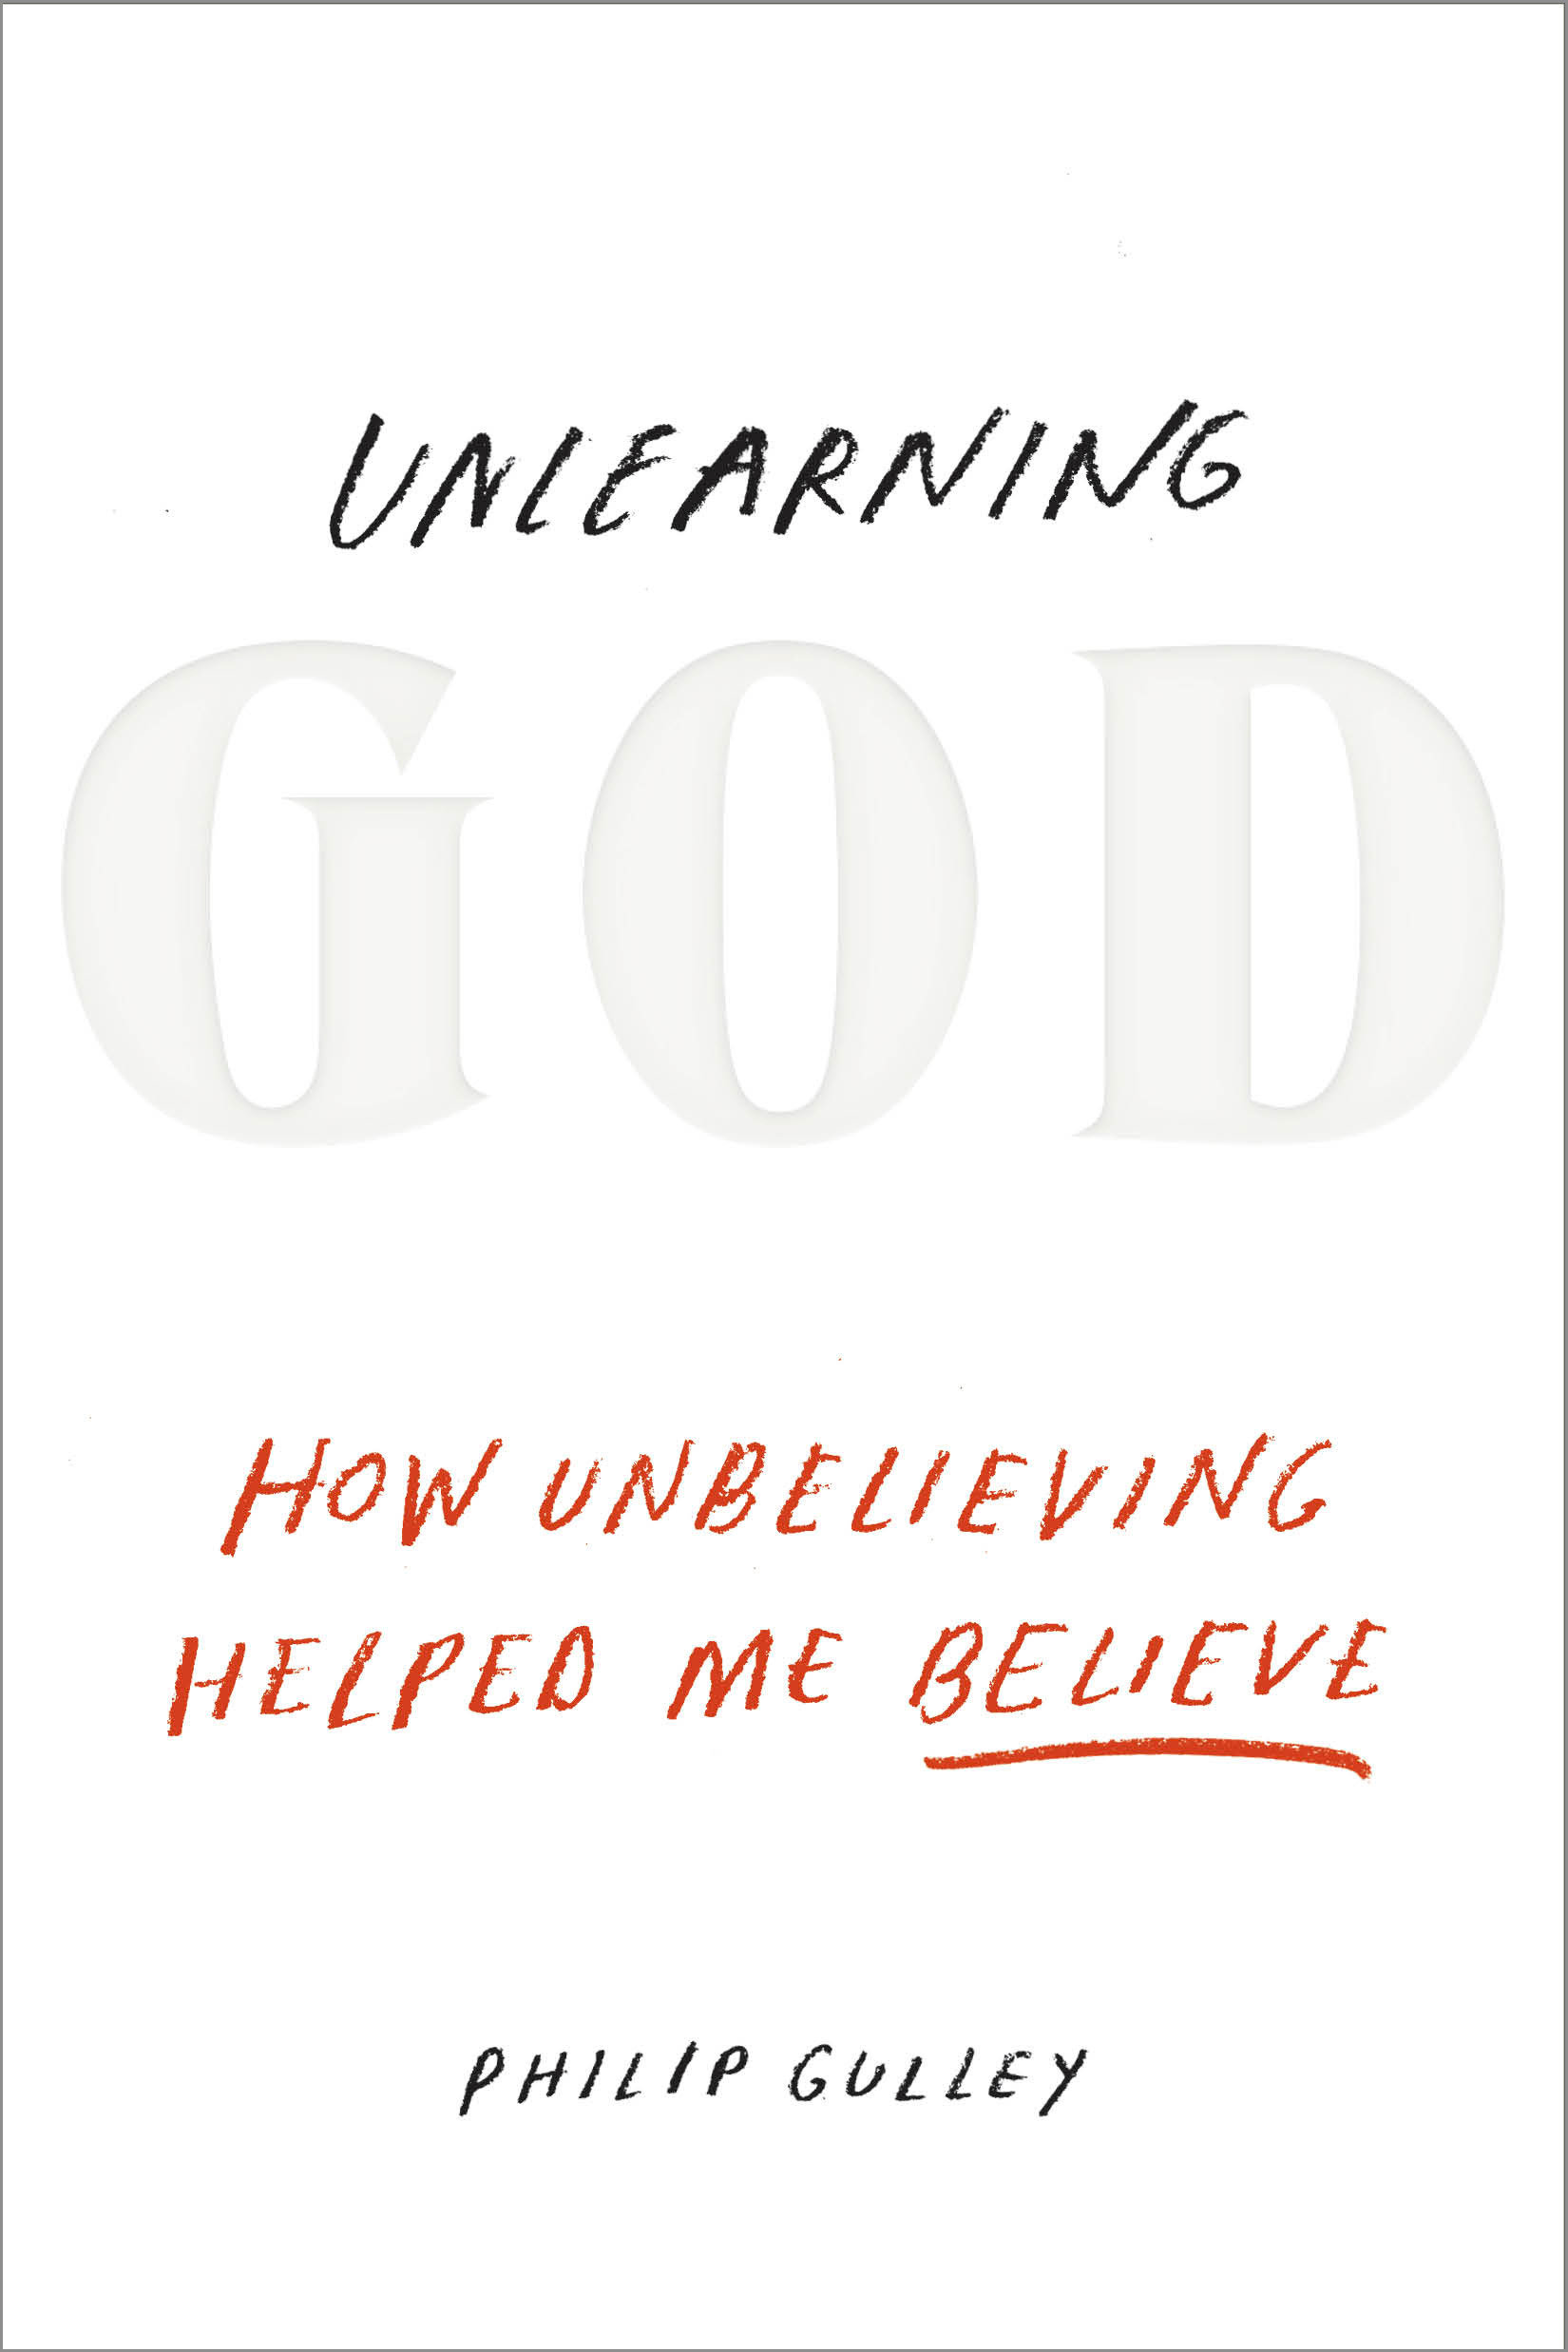 Unlearning God (Hardcover Book)